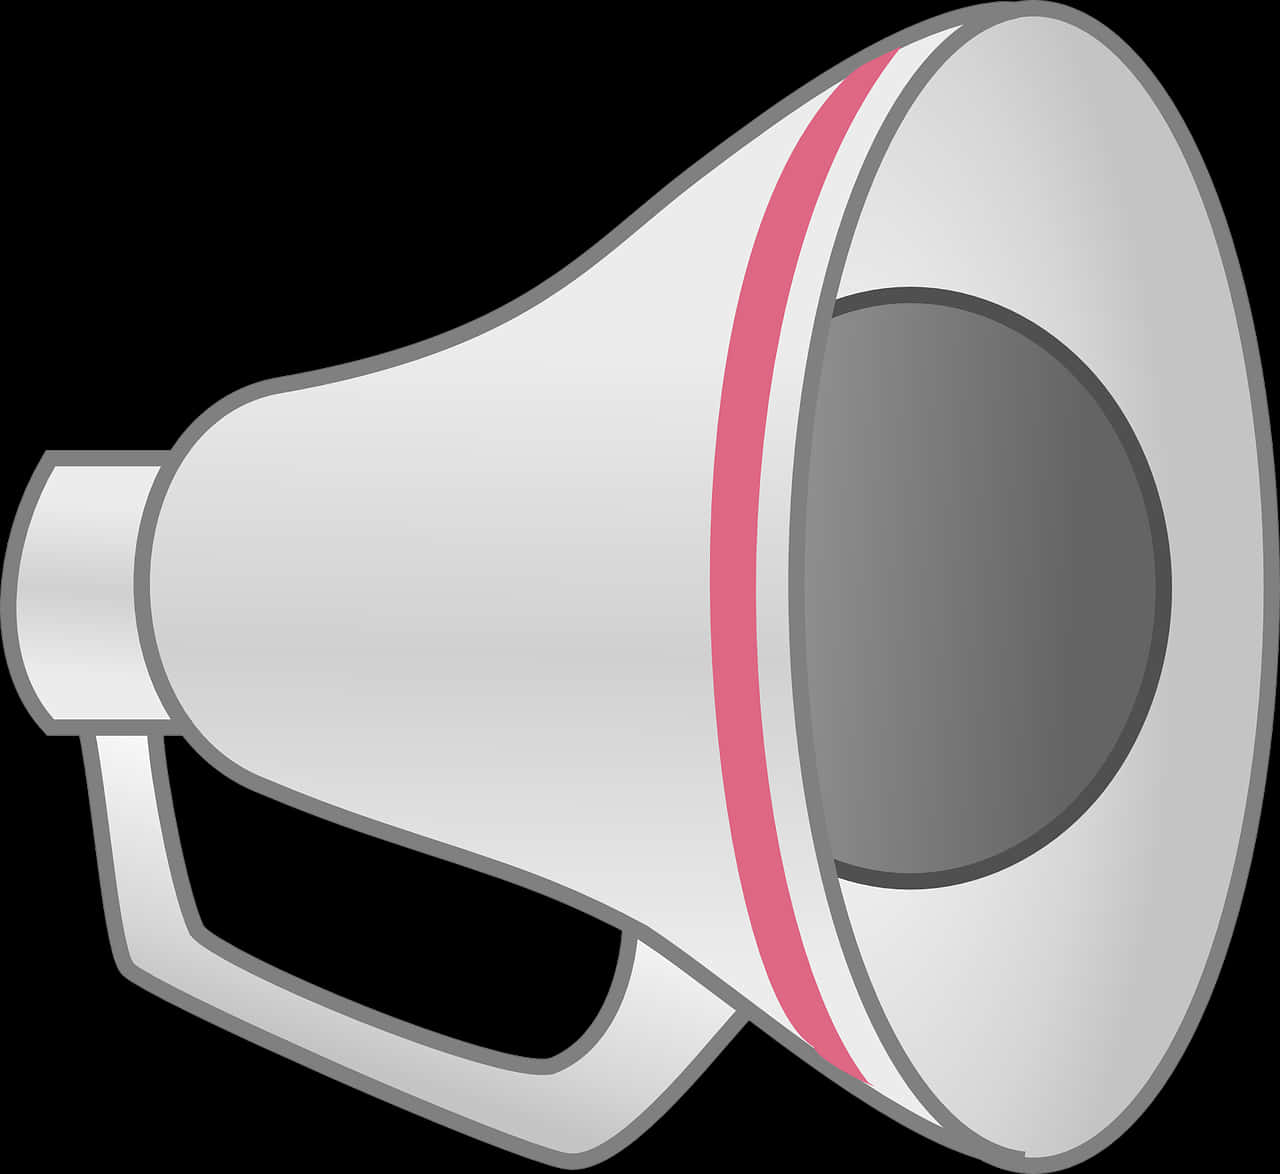 A White Megaphone With A Red Stripe